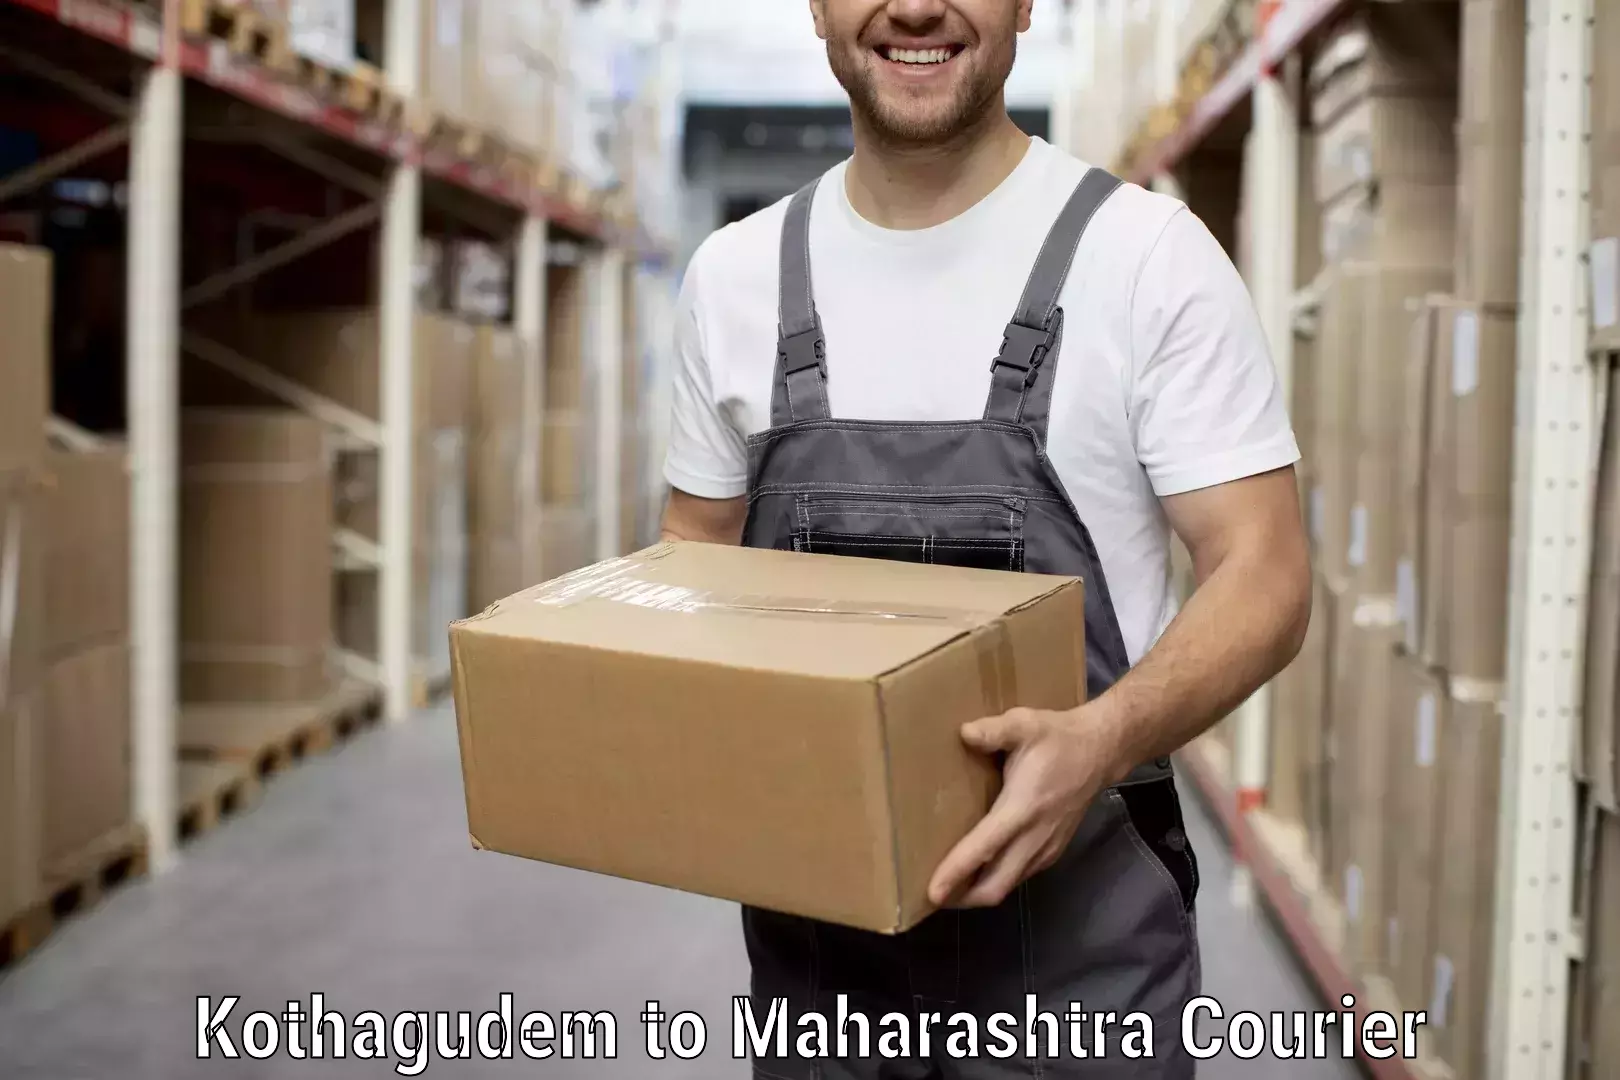 Professional movers and packers in Kothagudem to Lonavala